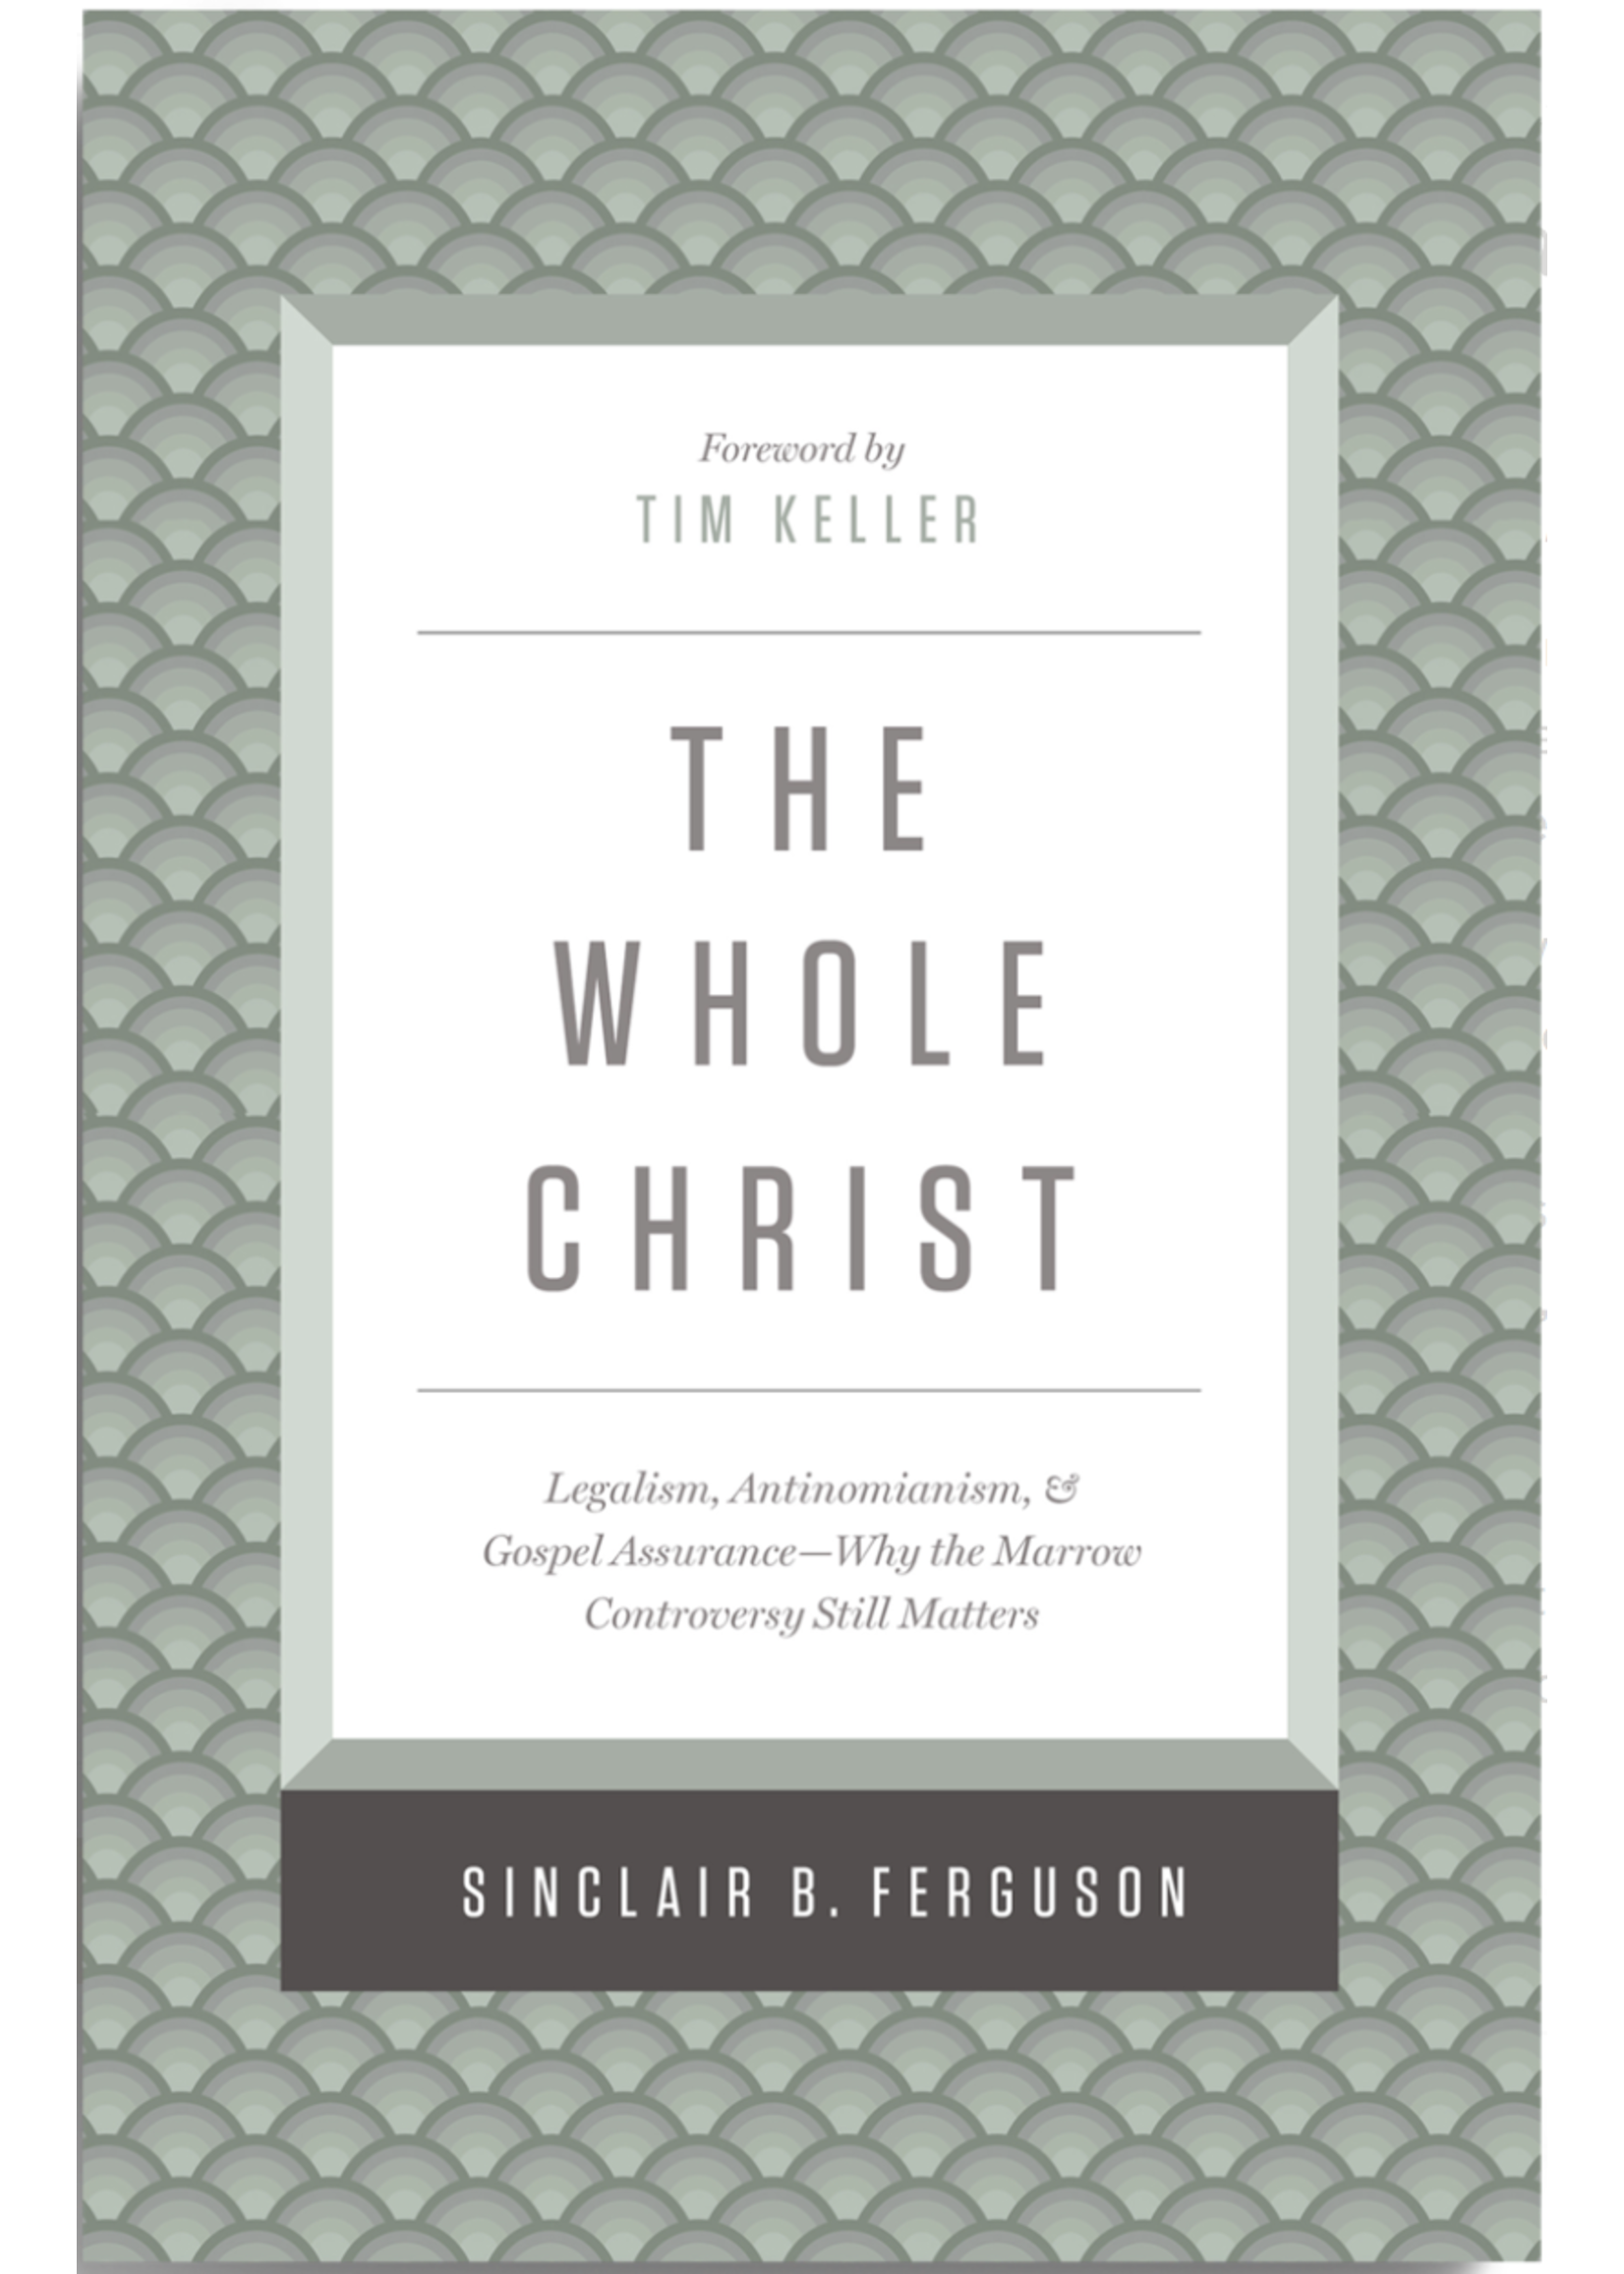 Ferguson, Sinclair B The Whole Christ: Legalism, Antinomianism, and Gospel Assurance—Why the Marrow Controversy Still Matters